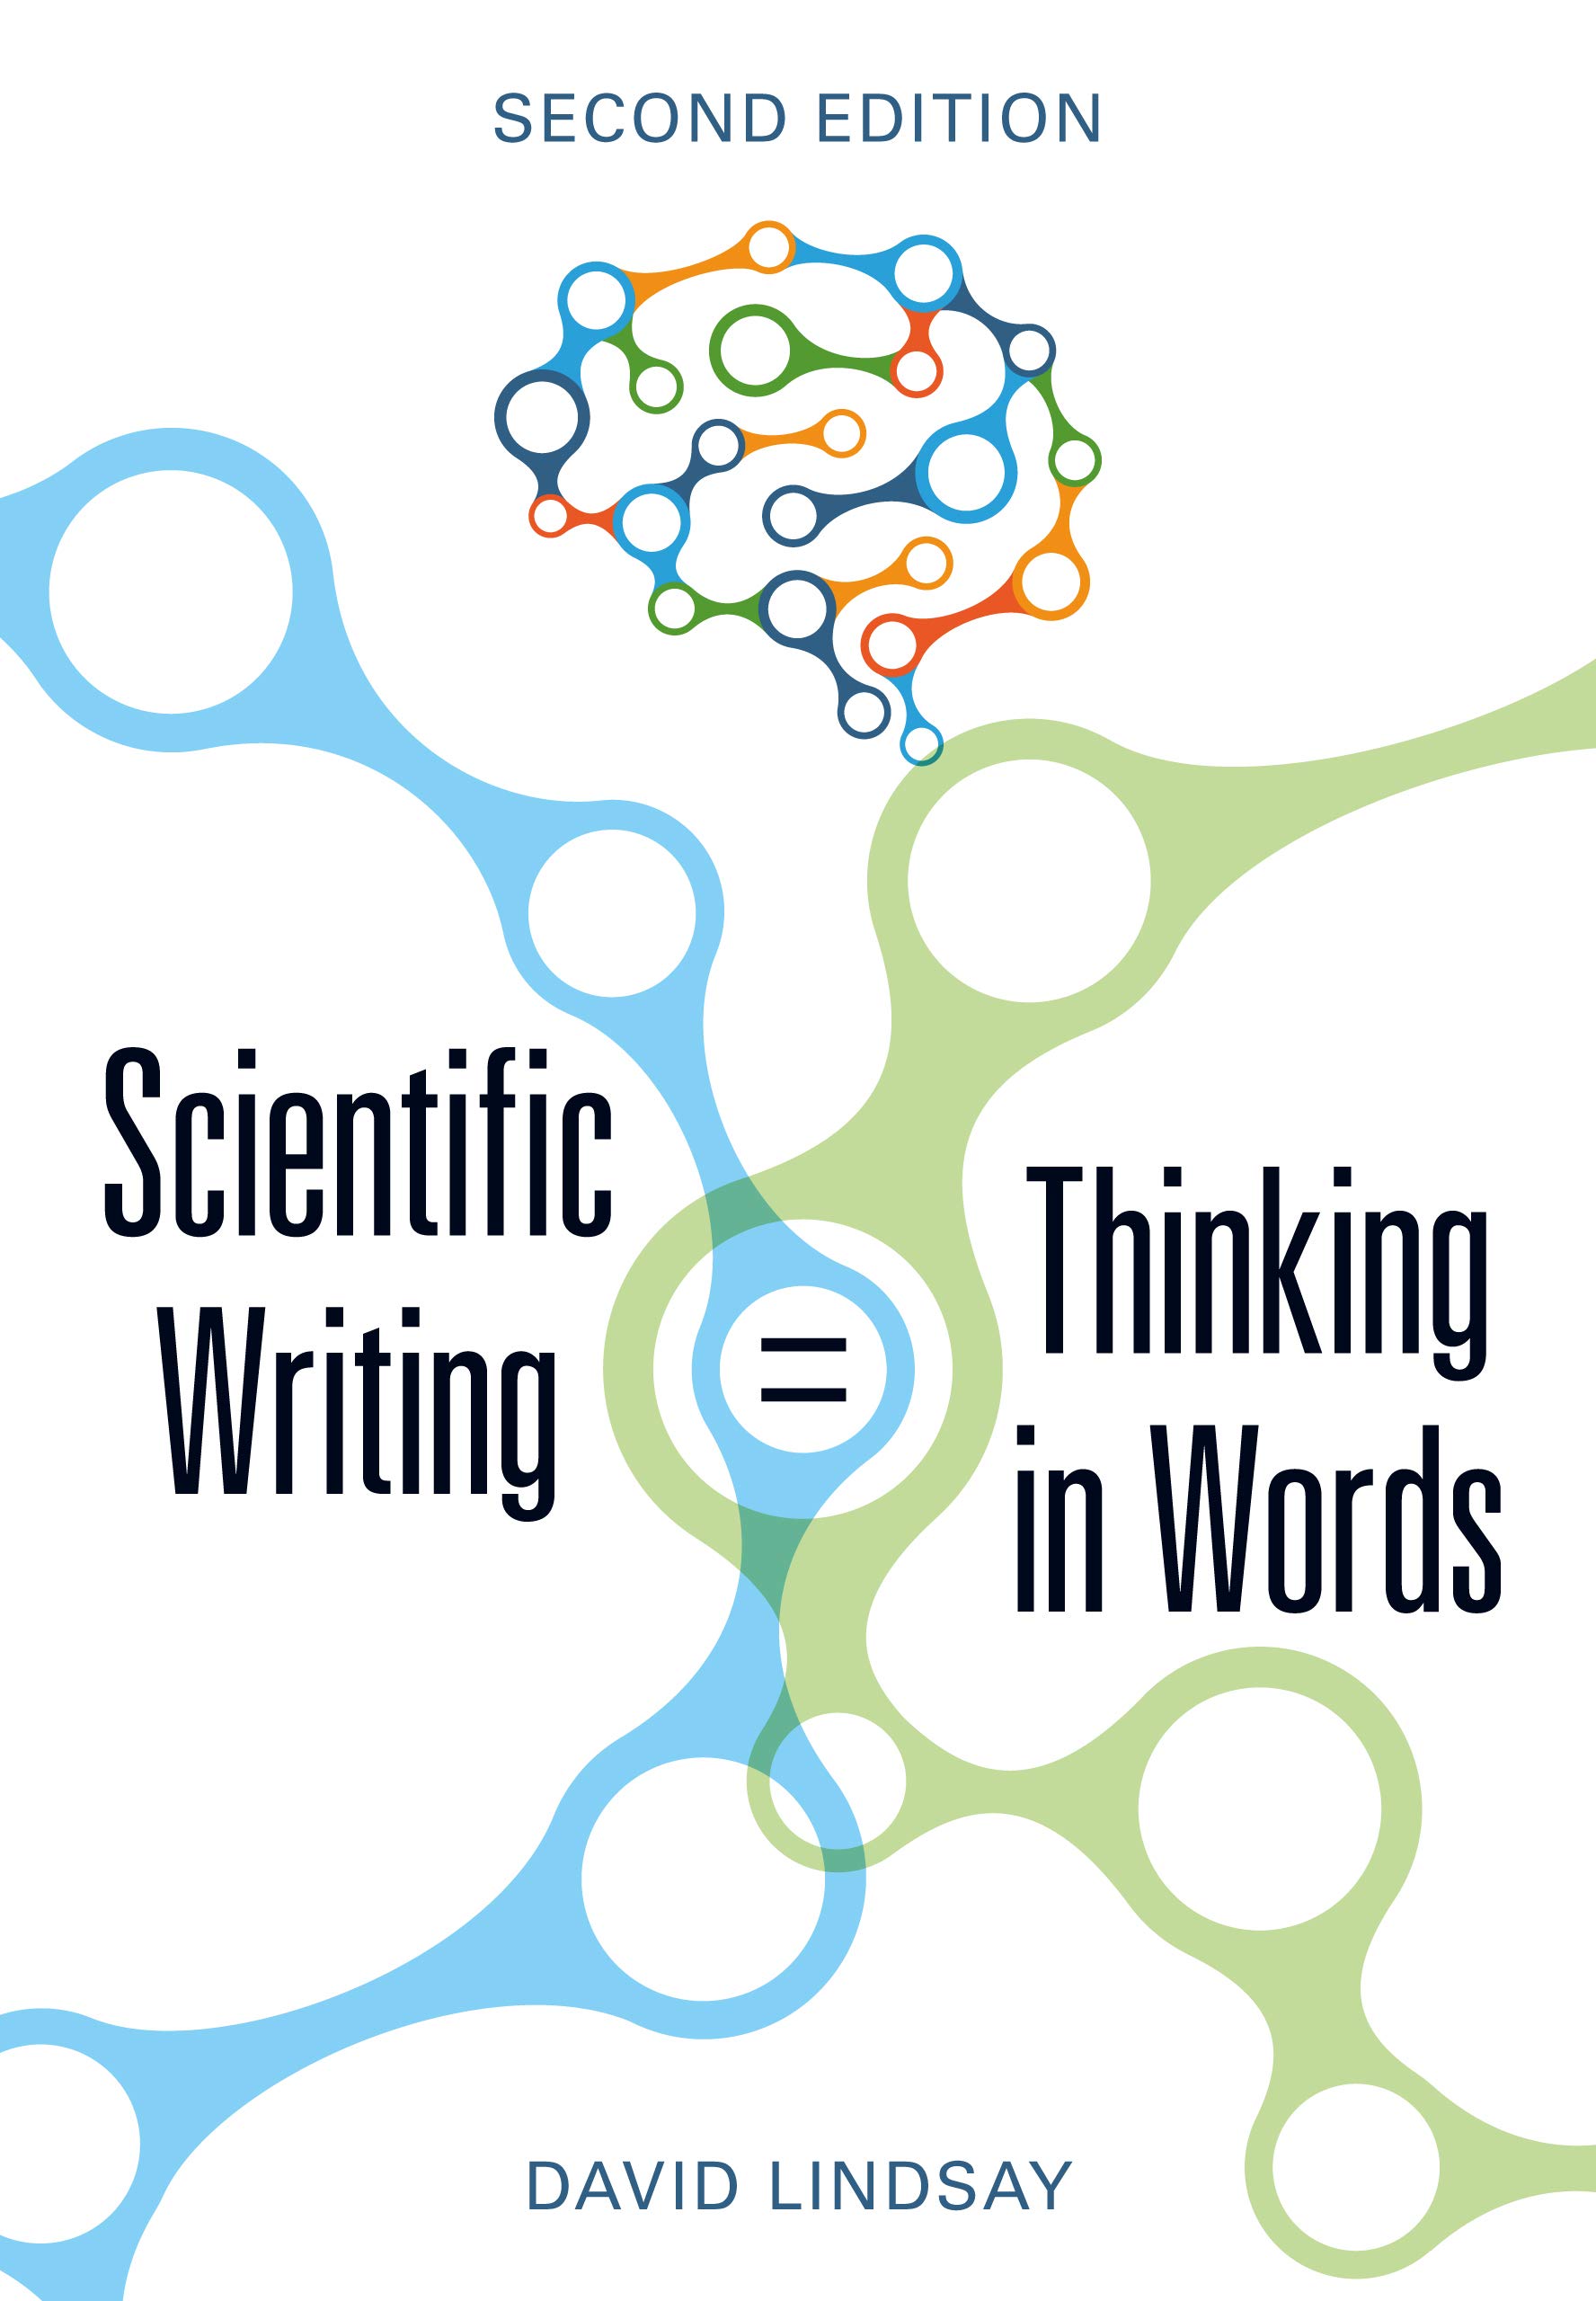 Scientific Writing = Thinking in Words | David Lindsay